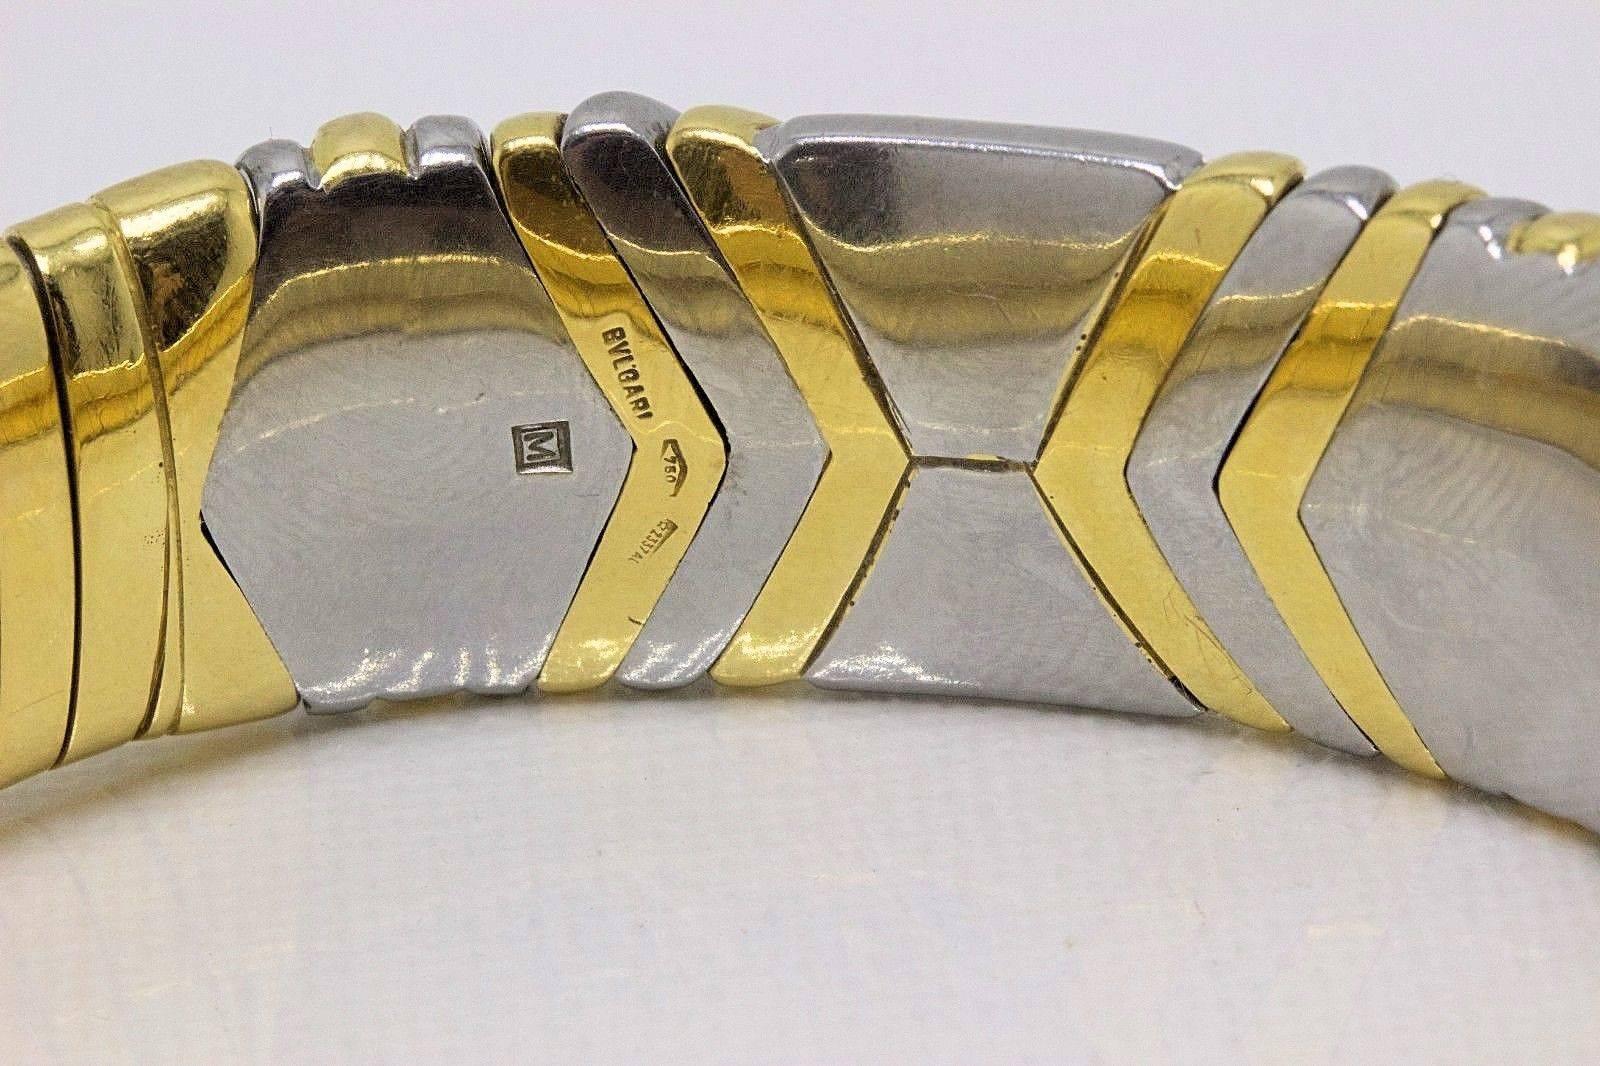 Brand:  BVLGARI
Style:  Alveare Tubogas Bracelet Cuff
Metal:  18KT White & Yellow Gold
Size:  7.50 Inches   
Weight:  69.56 Grams
Width:  15 MM
Hallmark:  